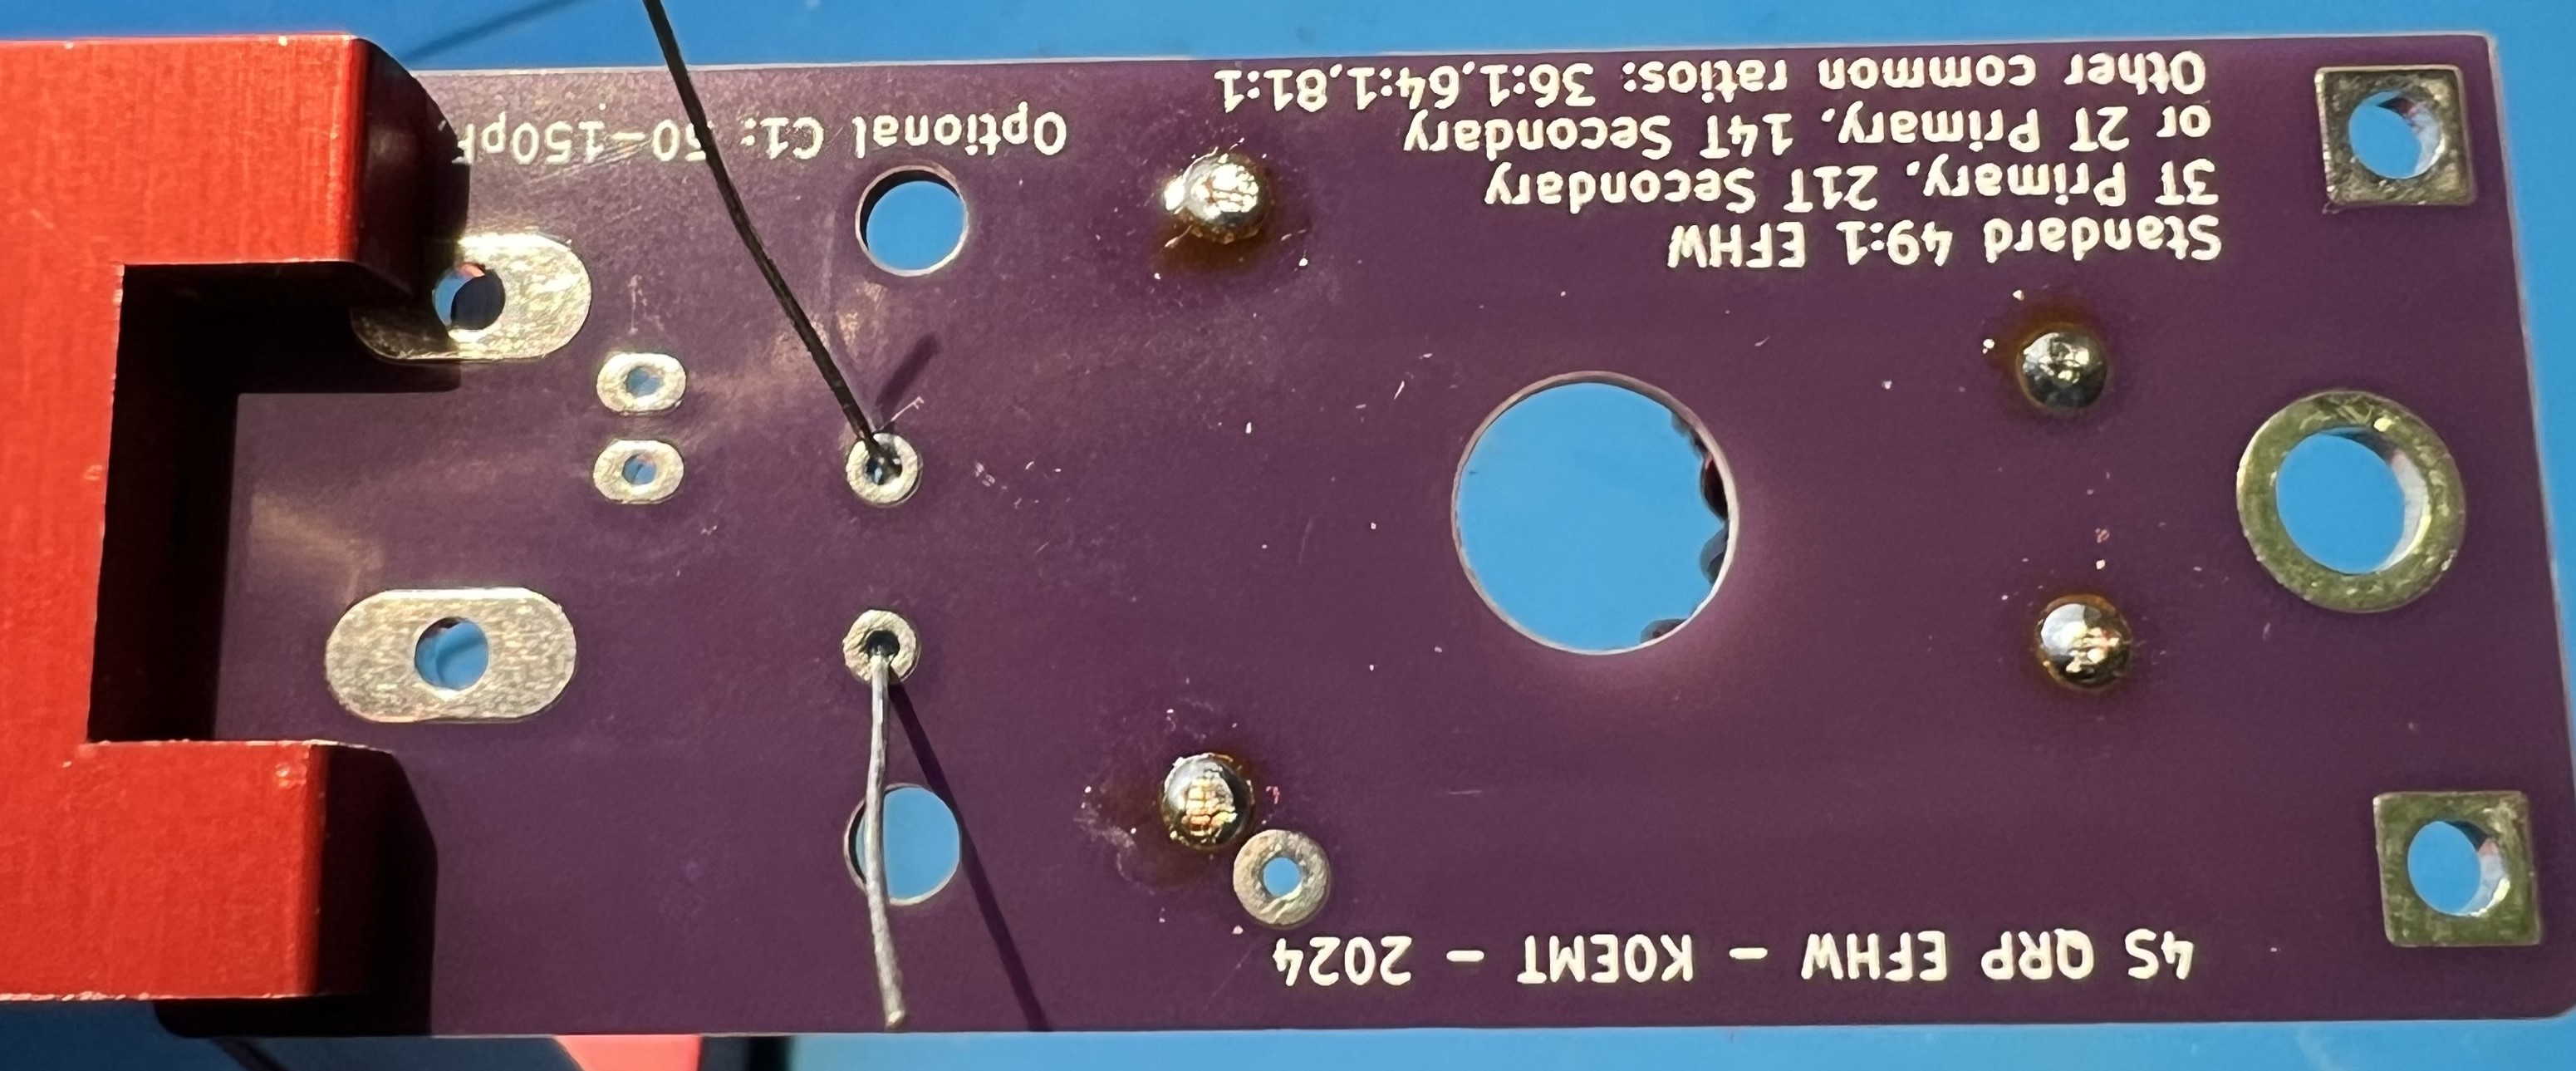 Capacitor on the bottom of the board